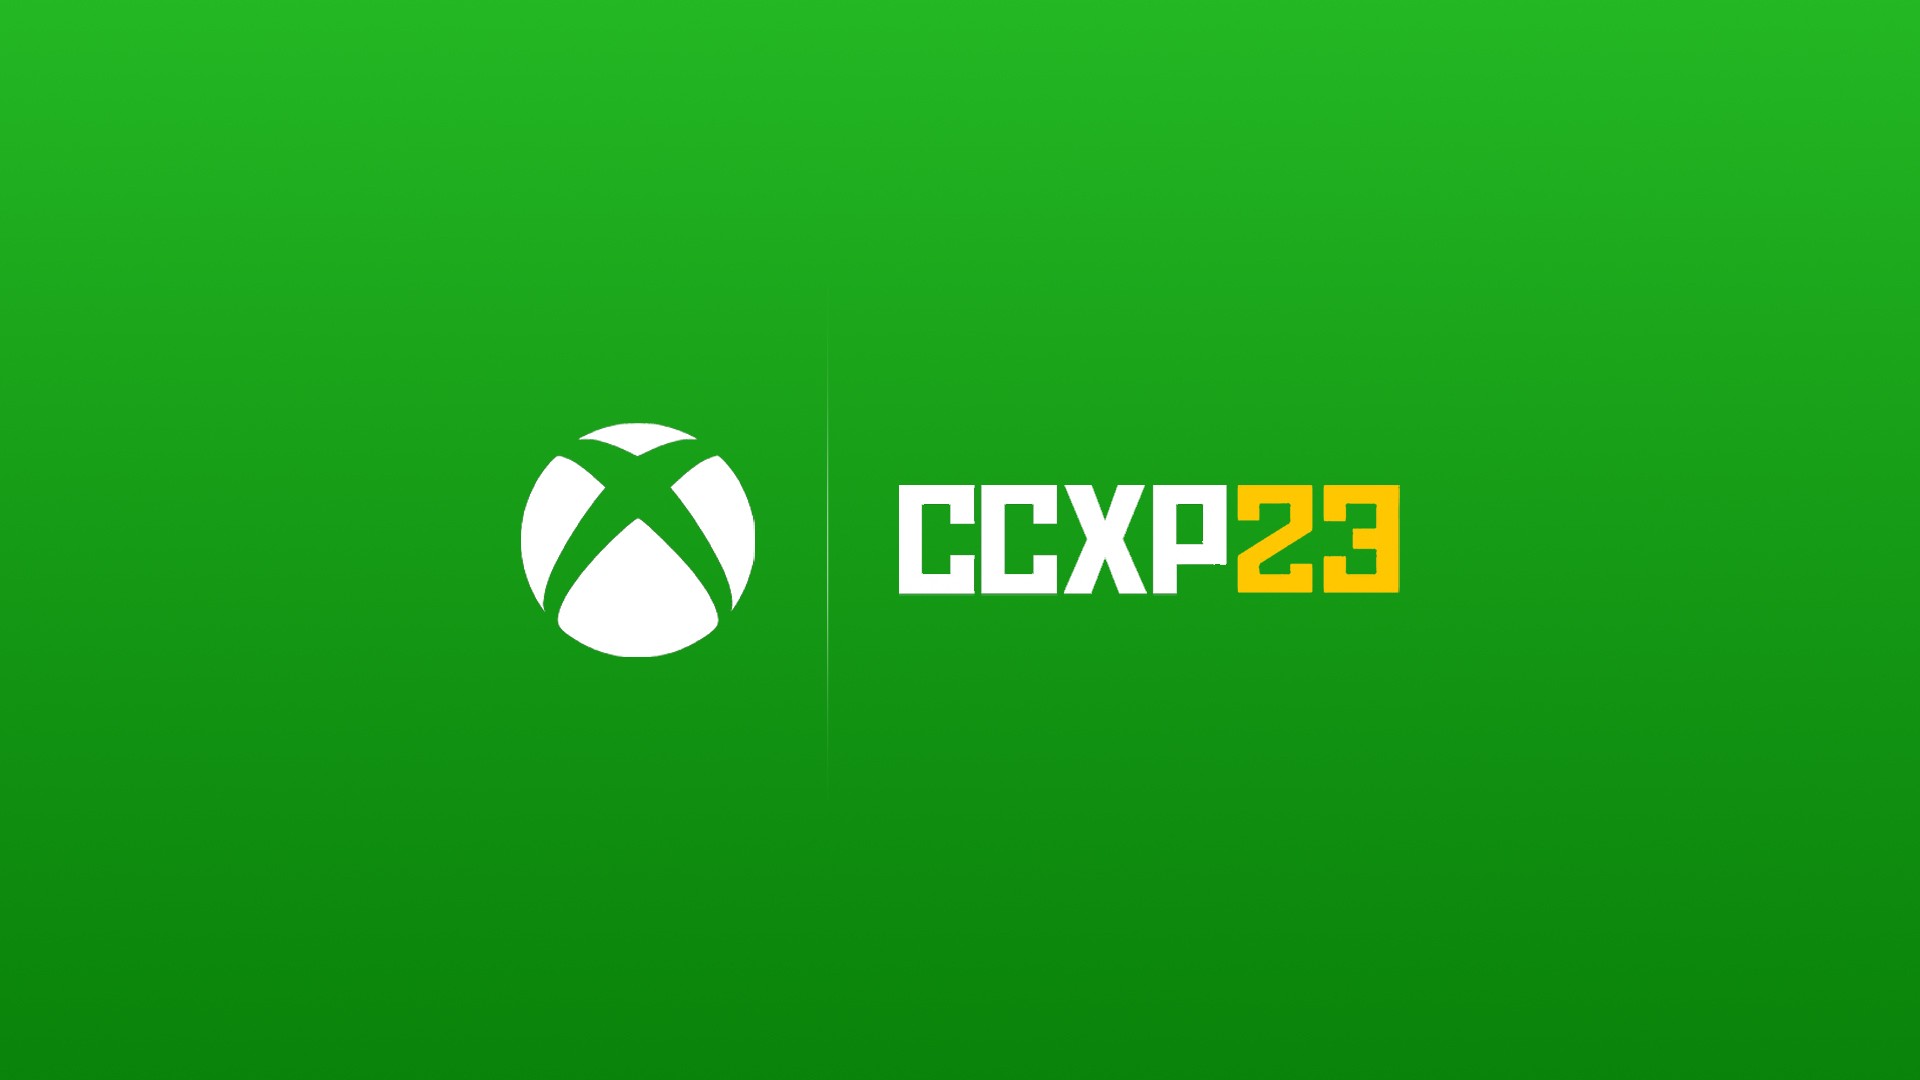 Xbox's Phil Spencer Hypes Up Hellblade 2 In CCXP 2023 Interview